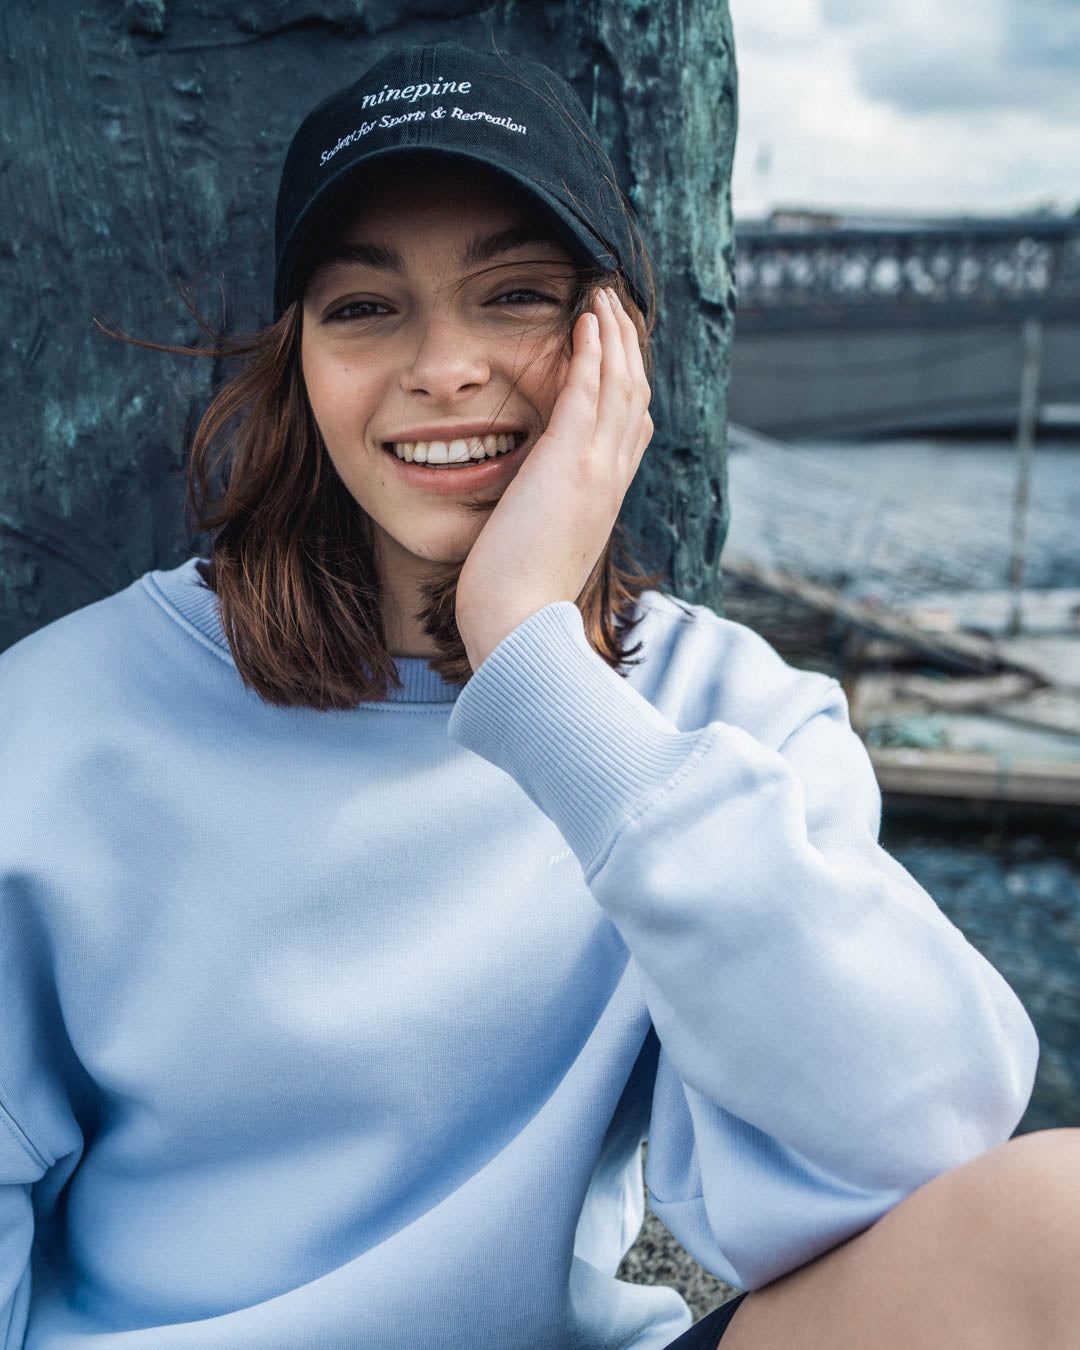 Woman in a blue ninepine sweatshirt and black cap smiling